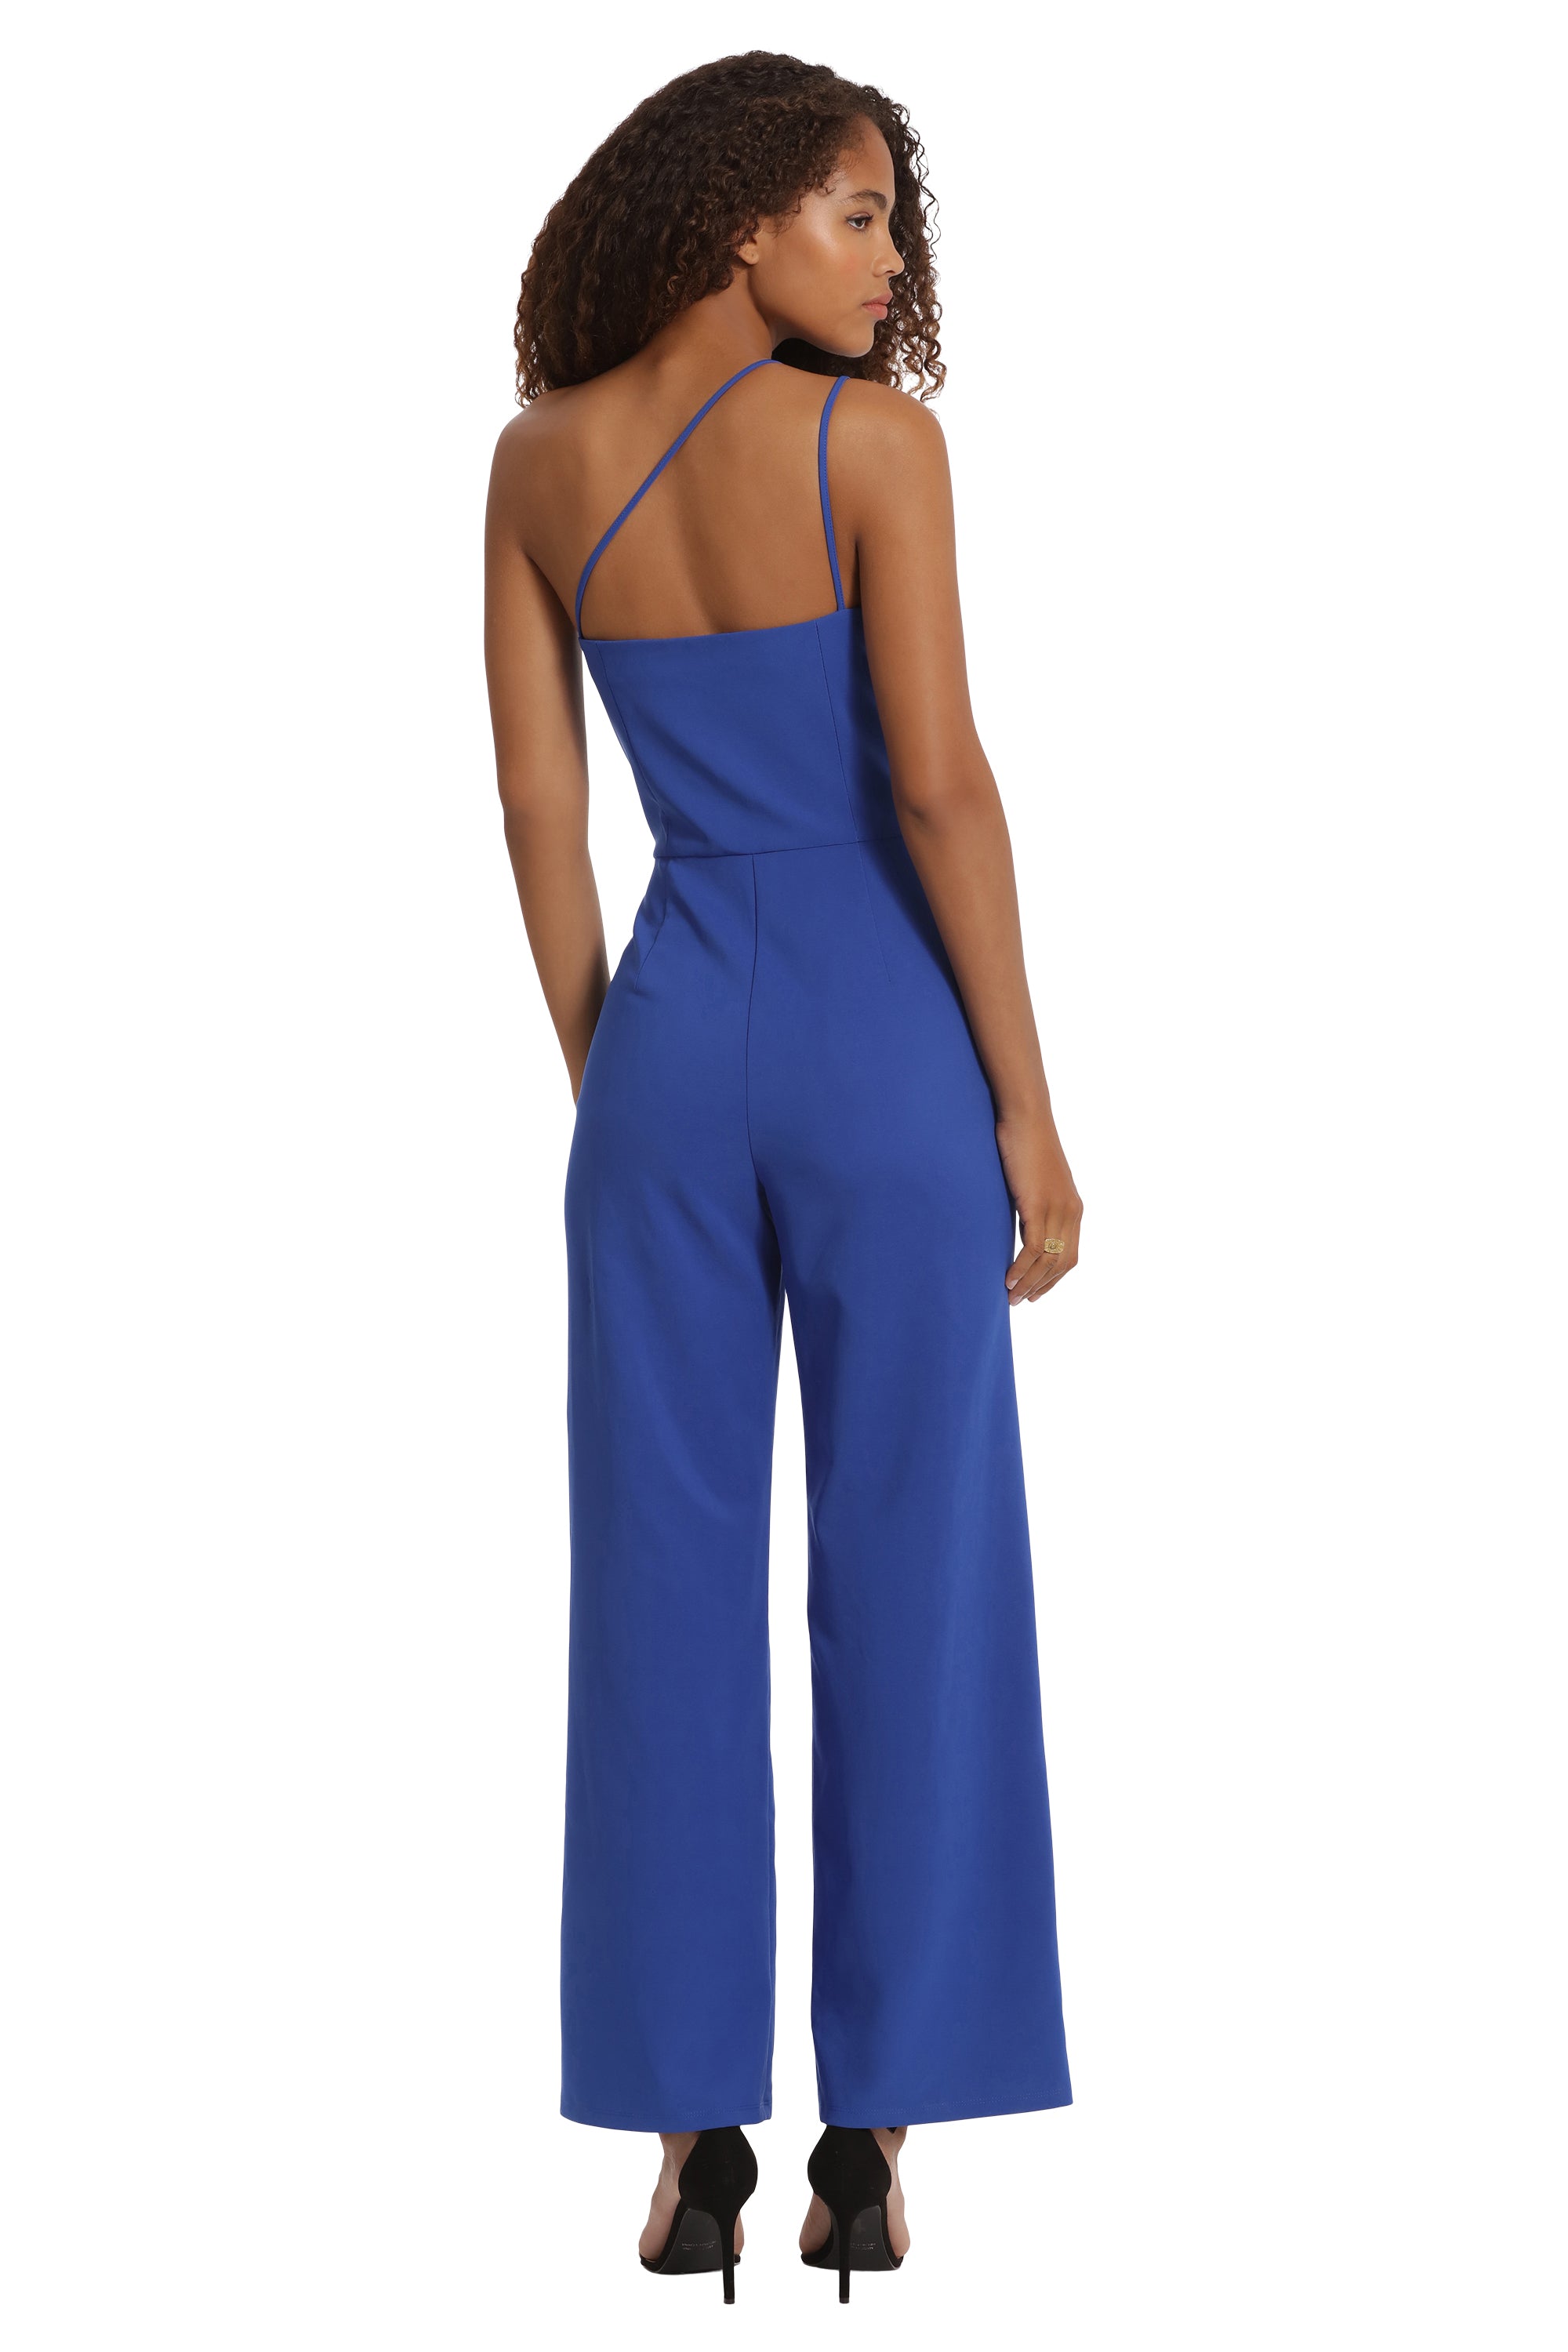 ODESSA royal blue one sleeve winged jumpsuit with detachable side trai –  Dolls of Decadence